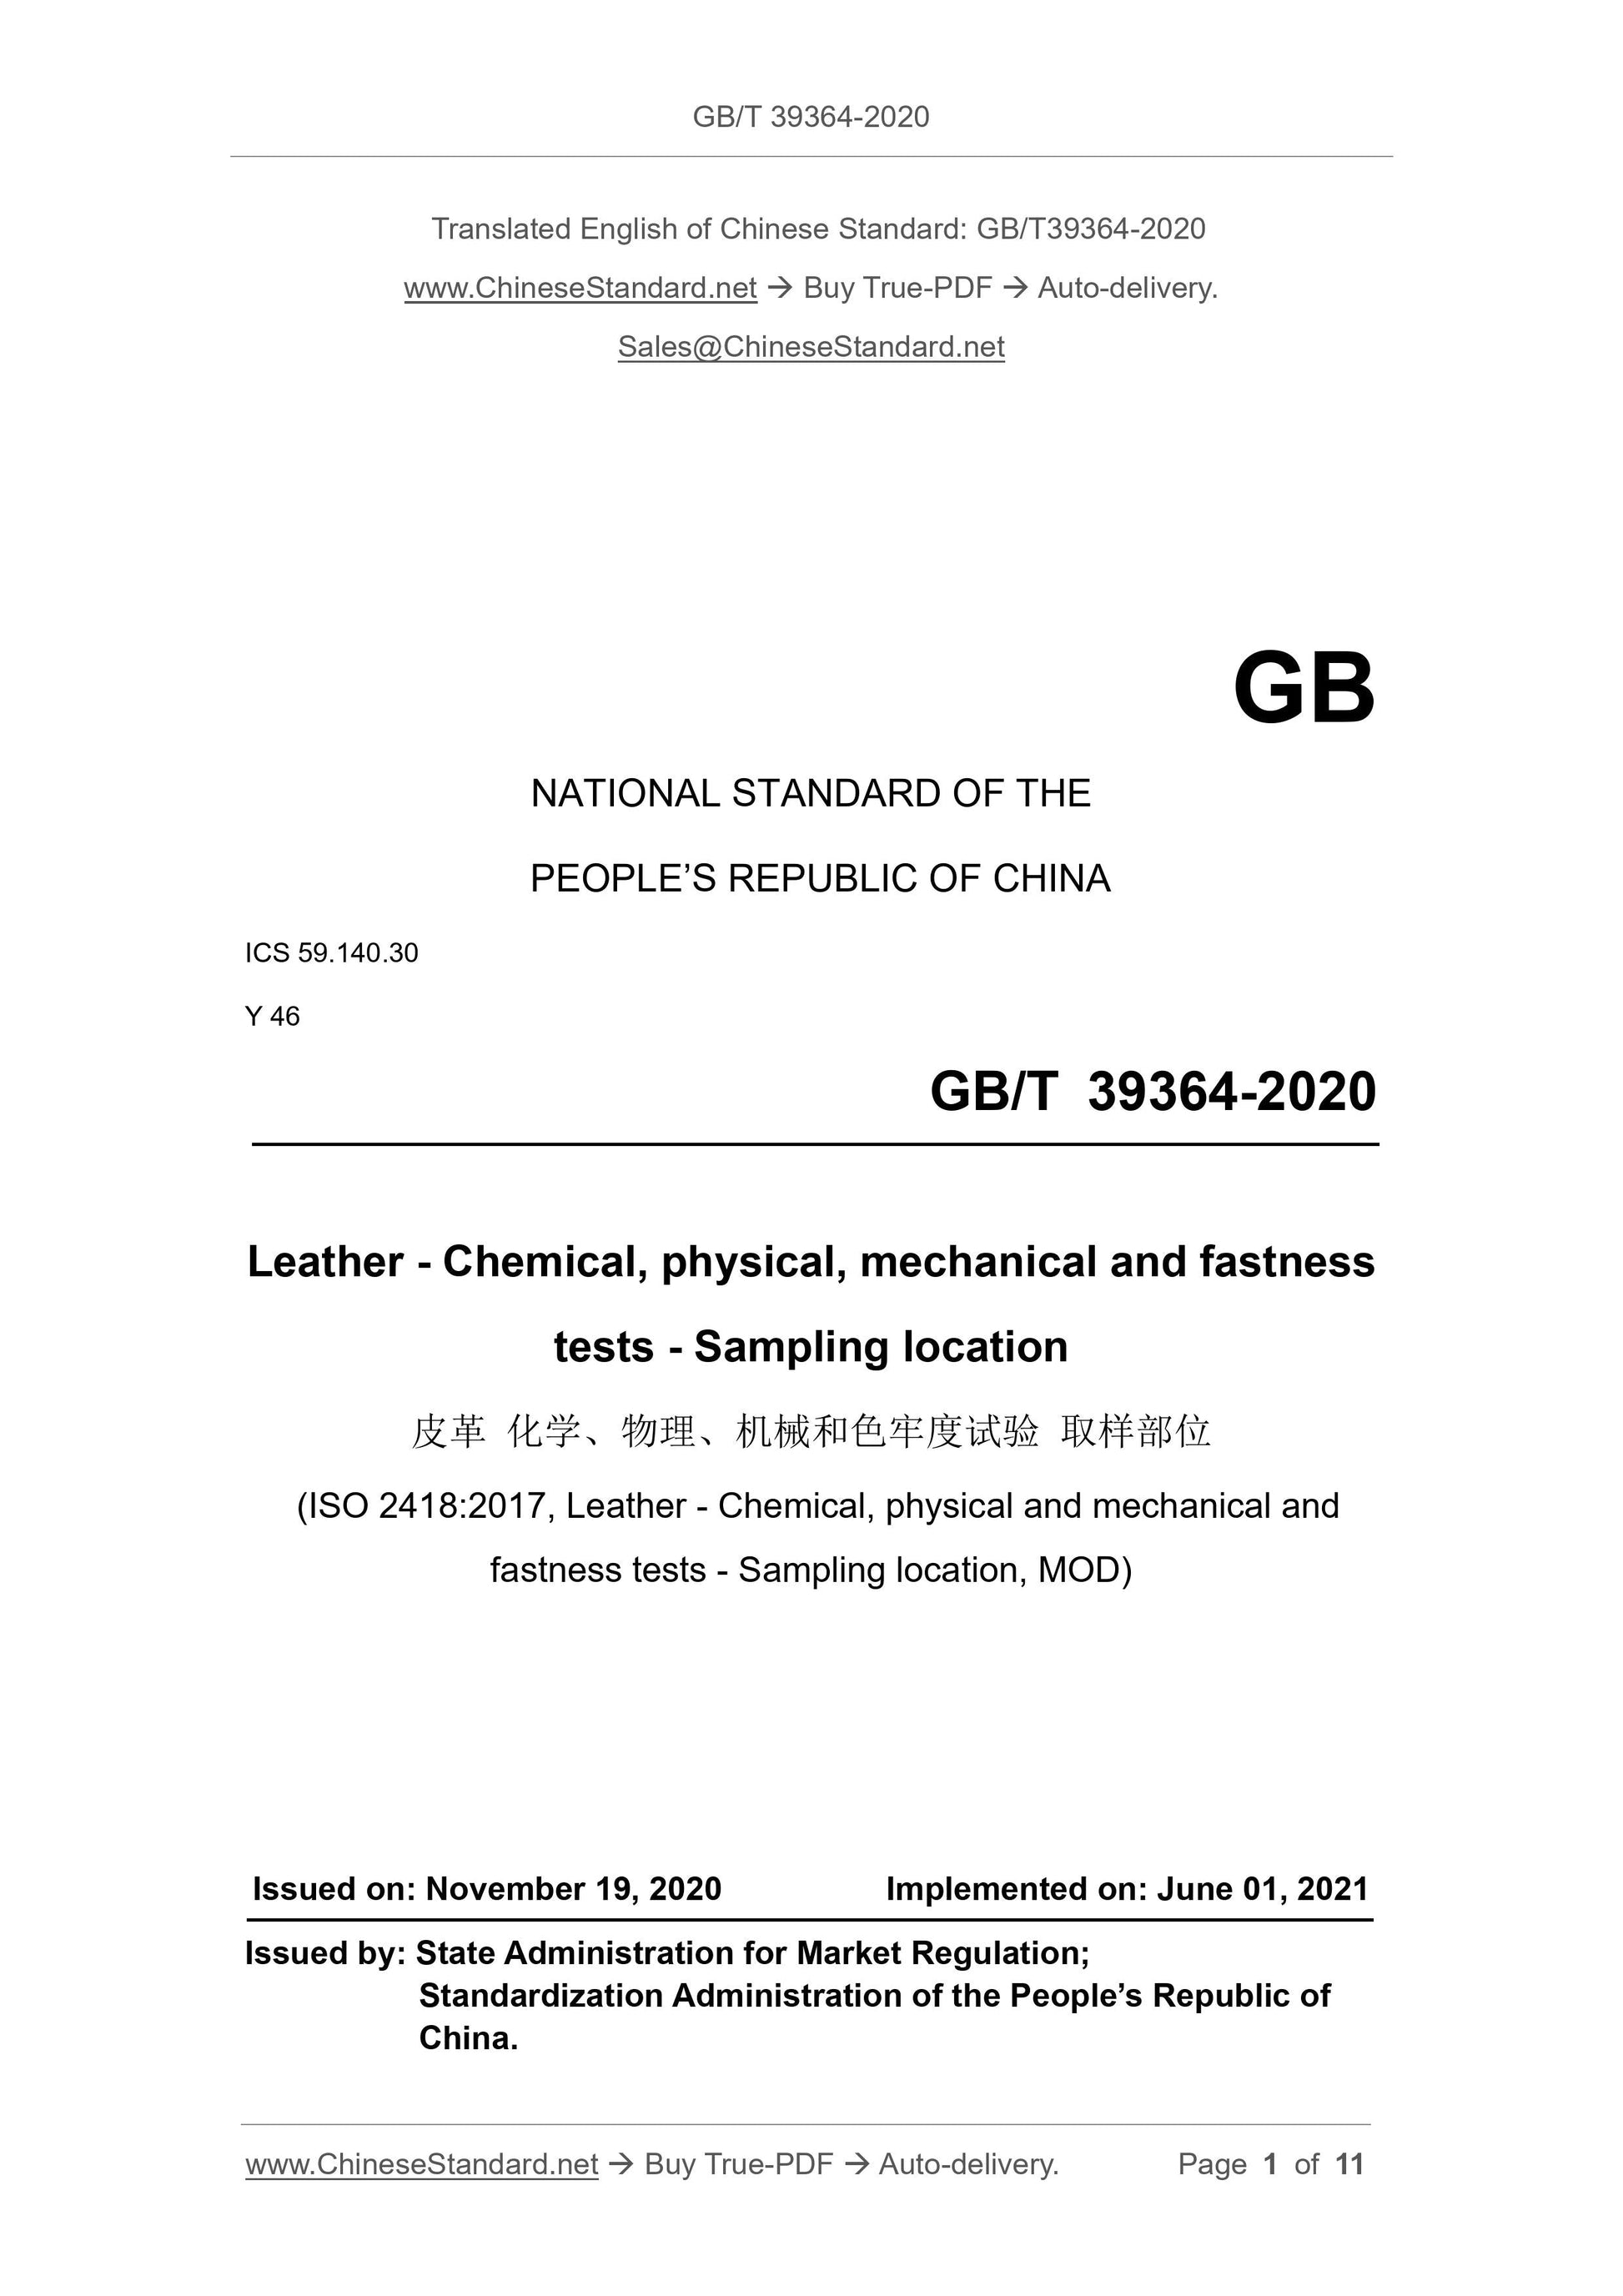 GB/T 39364-2020 Page 1